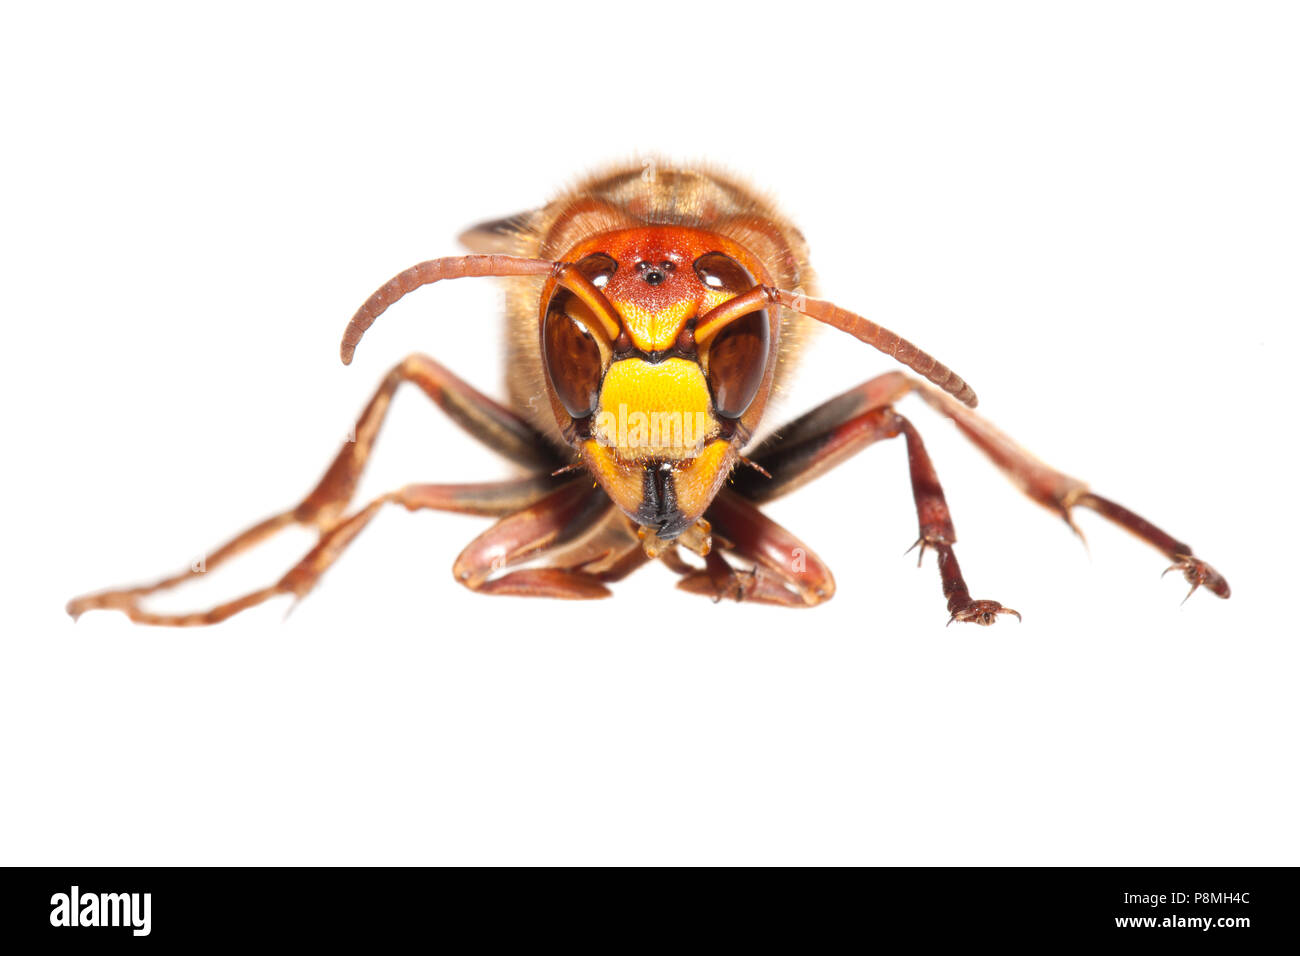 hornet isolated against a white background Stock Photo